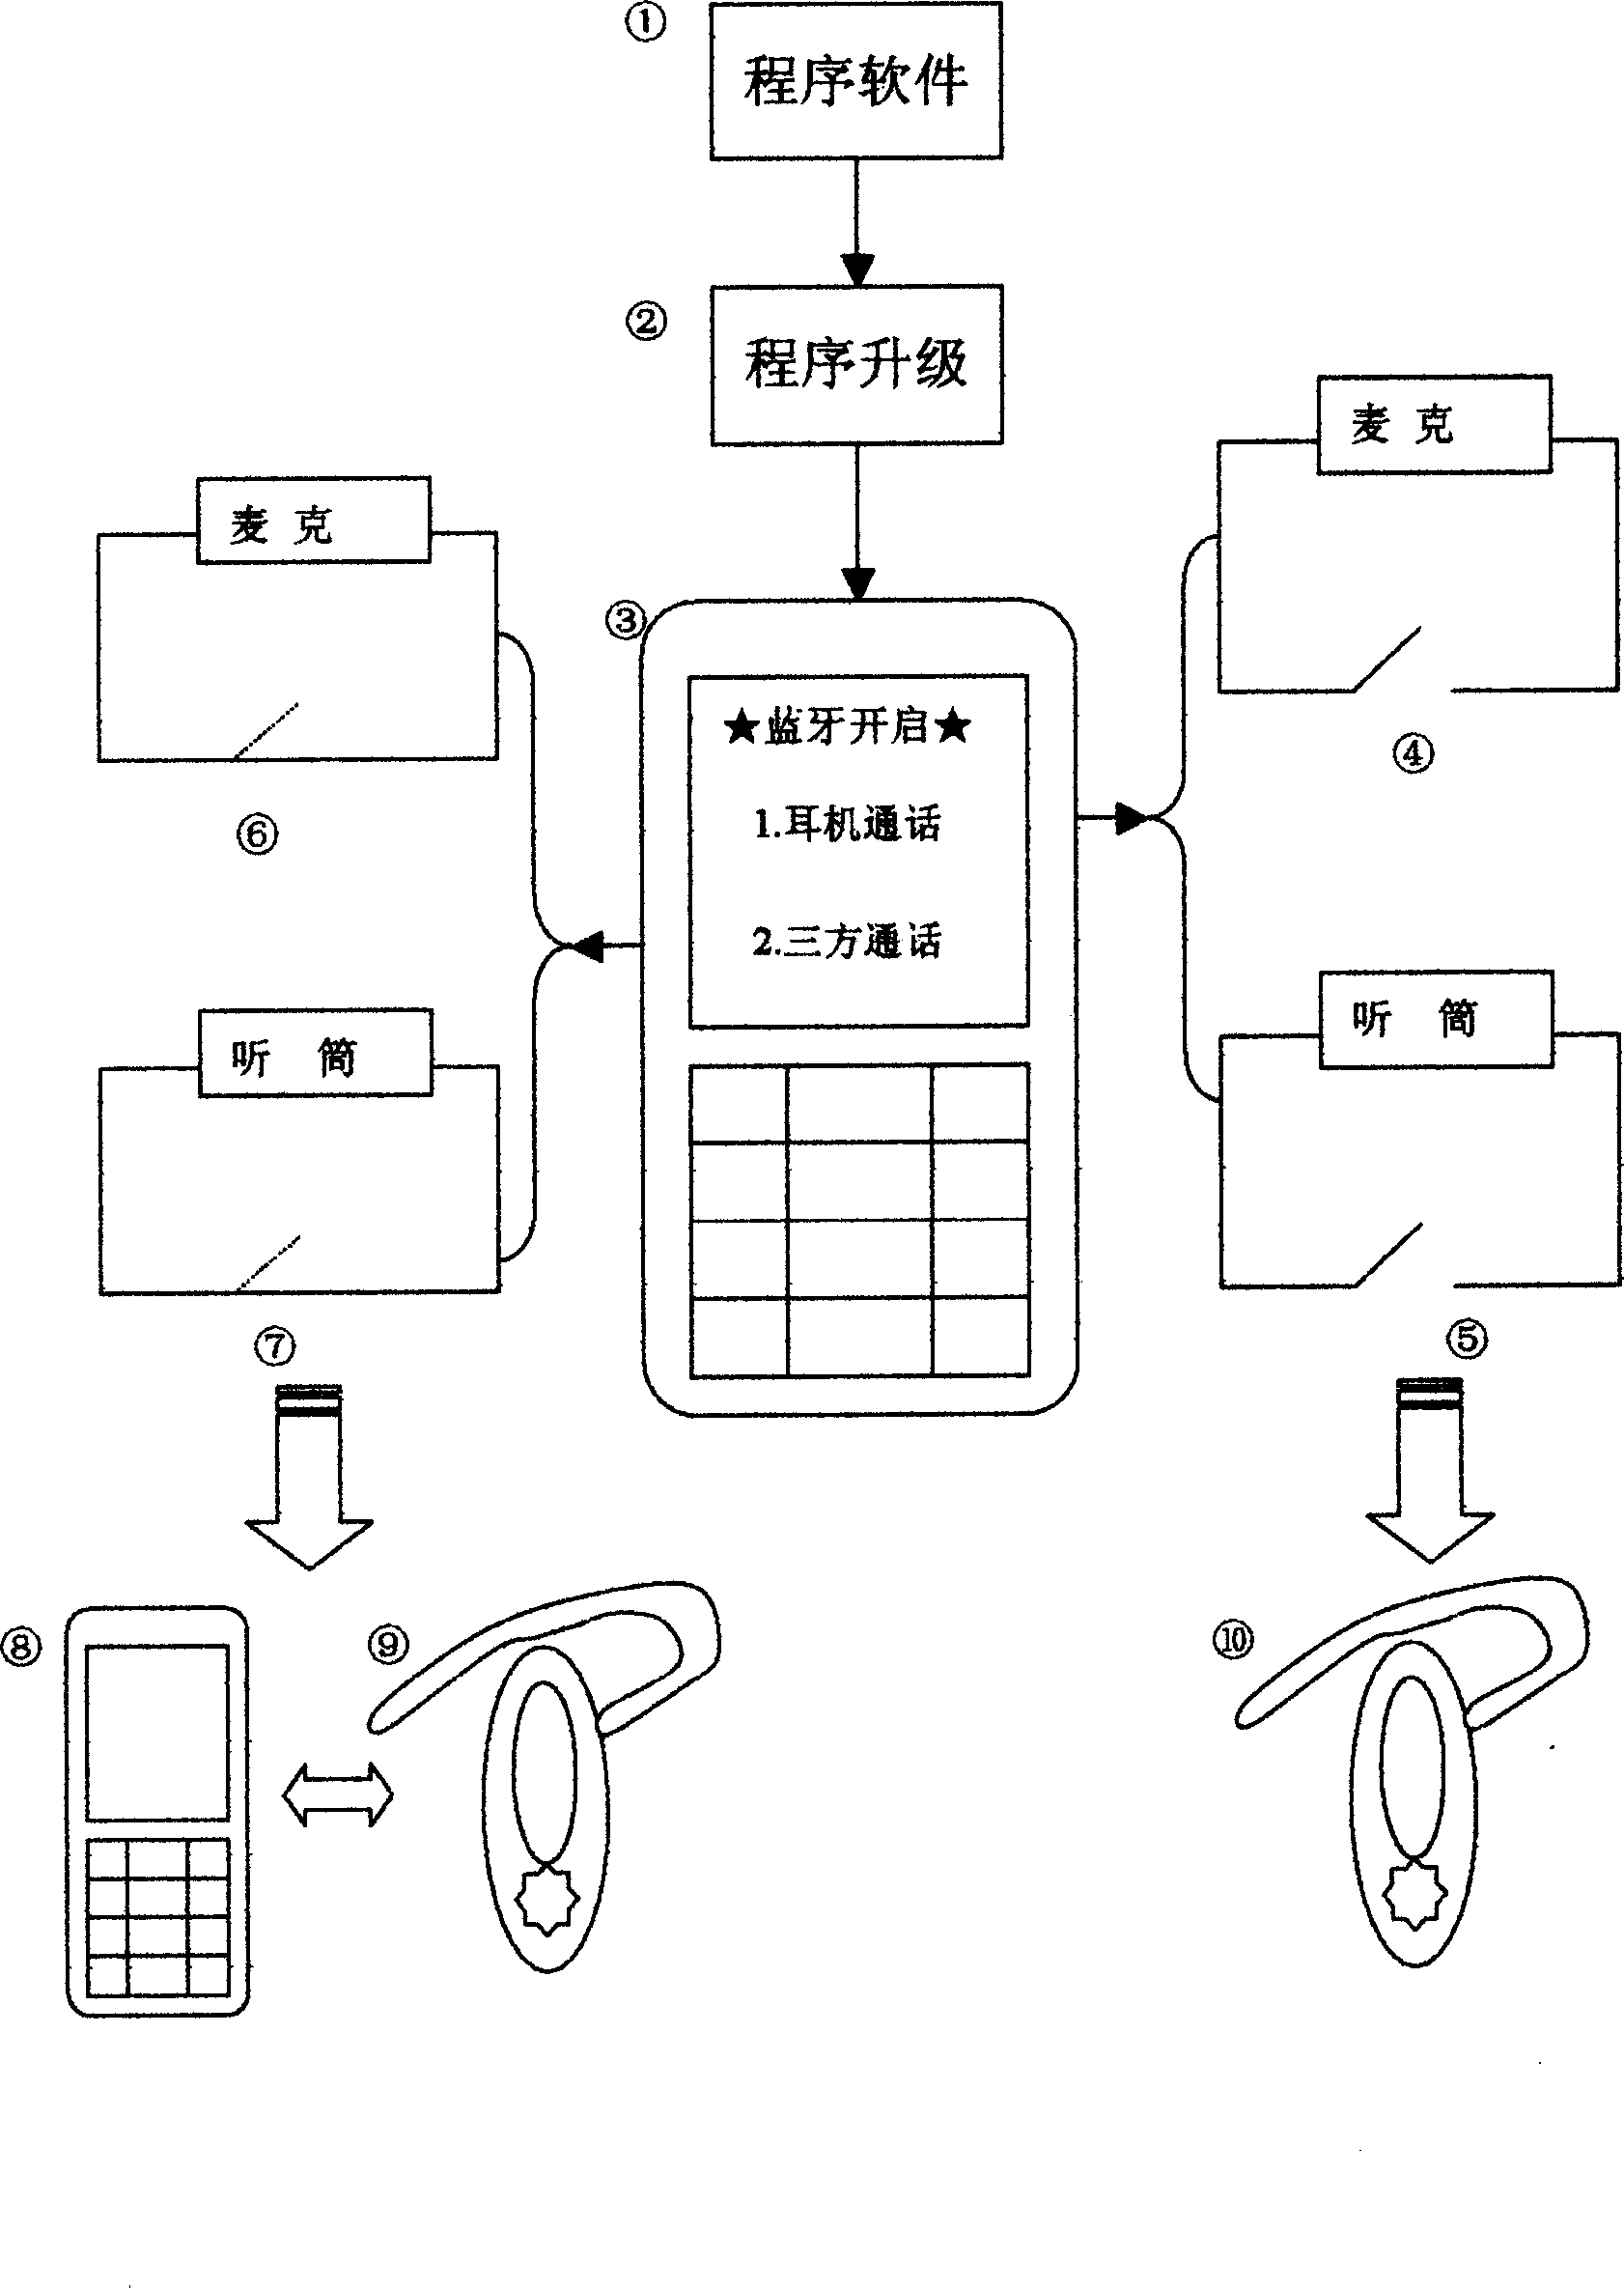 Blue-tooth mobile telephone long-distance oral interpreting system and operating method